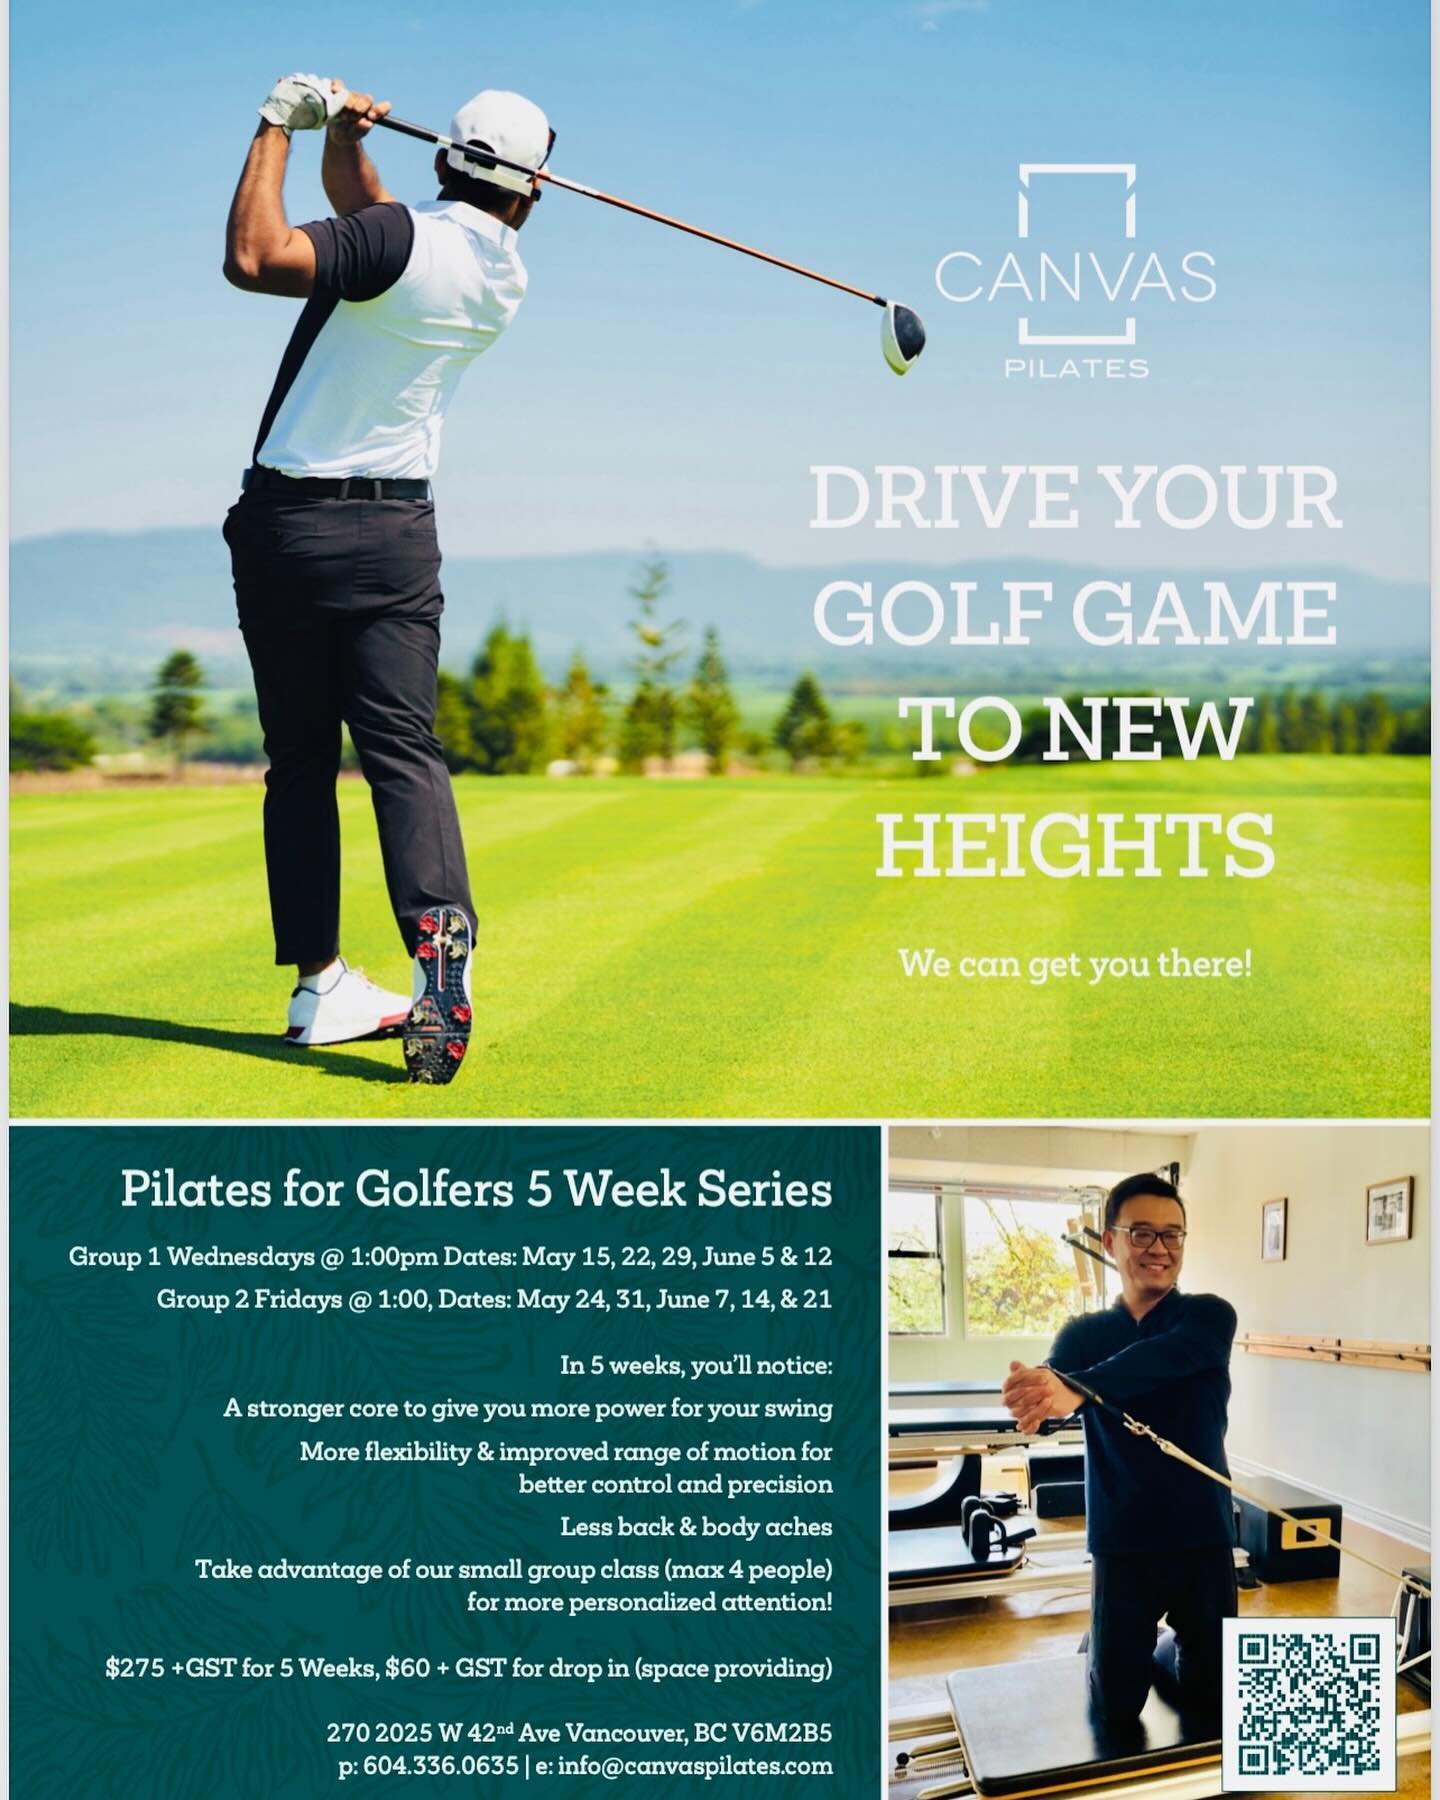 Starting next week, we&rsquo;re excited to offer
Pilates for Golfers! ⛳️ 🏌️&zwj;♀️ 
5 Week Series

*Enhance your experience on the green
*Get more power &amp; precision in your swing
*Experience less back and body aches

Sign up now! Link in bio.
Re